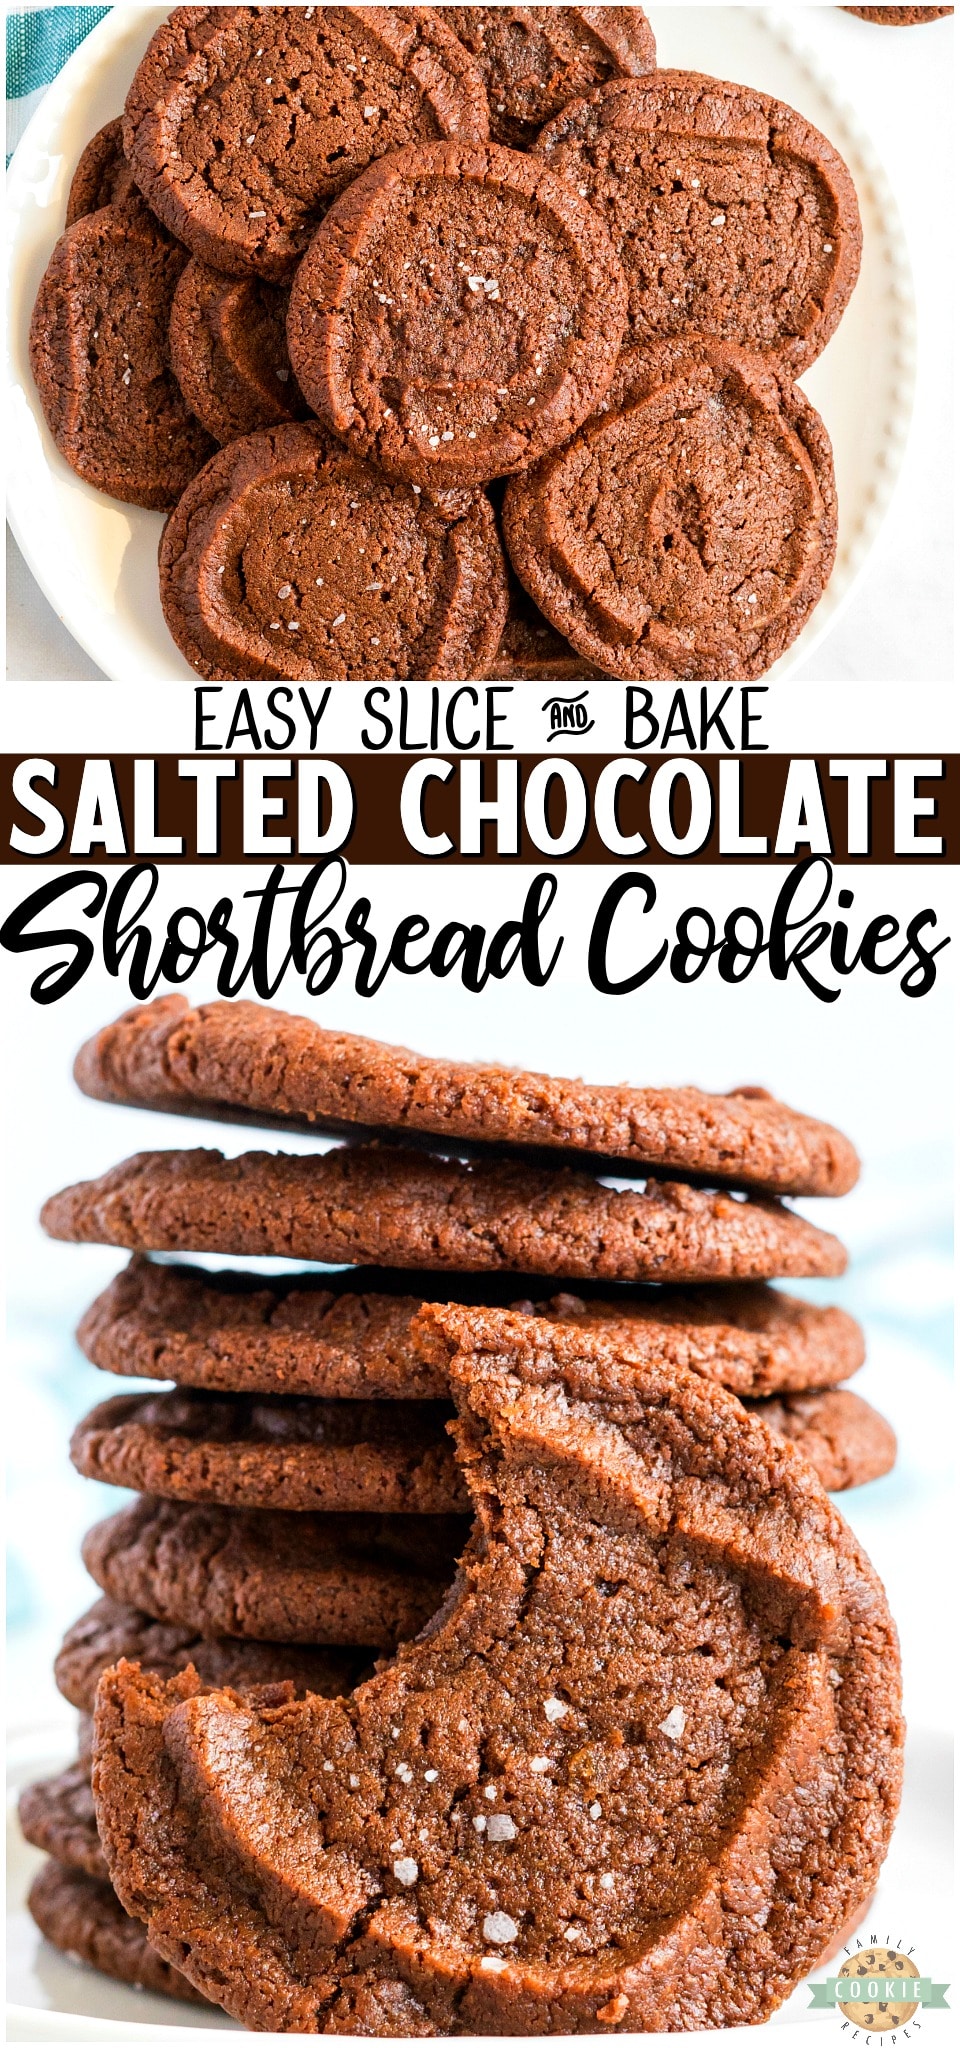 Salted Chocolate Shortbread Cookies made with cocoa powder and butter & topped with flakes of sea salt for the perfect chocolate cookie! Buttery shortbread slice & bake cookies that everyone enjoys! #shortbread #cookies #chocolate #seasalt #dessert #baking #easyrecipe from BUTTER WITH A SIDE OF BREAD via @buttergirls